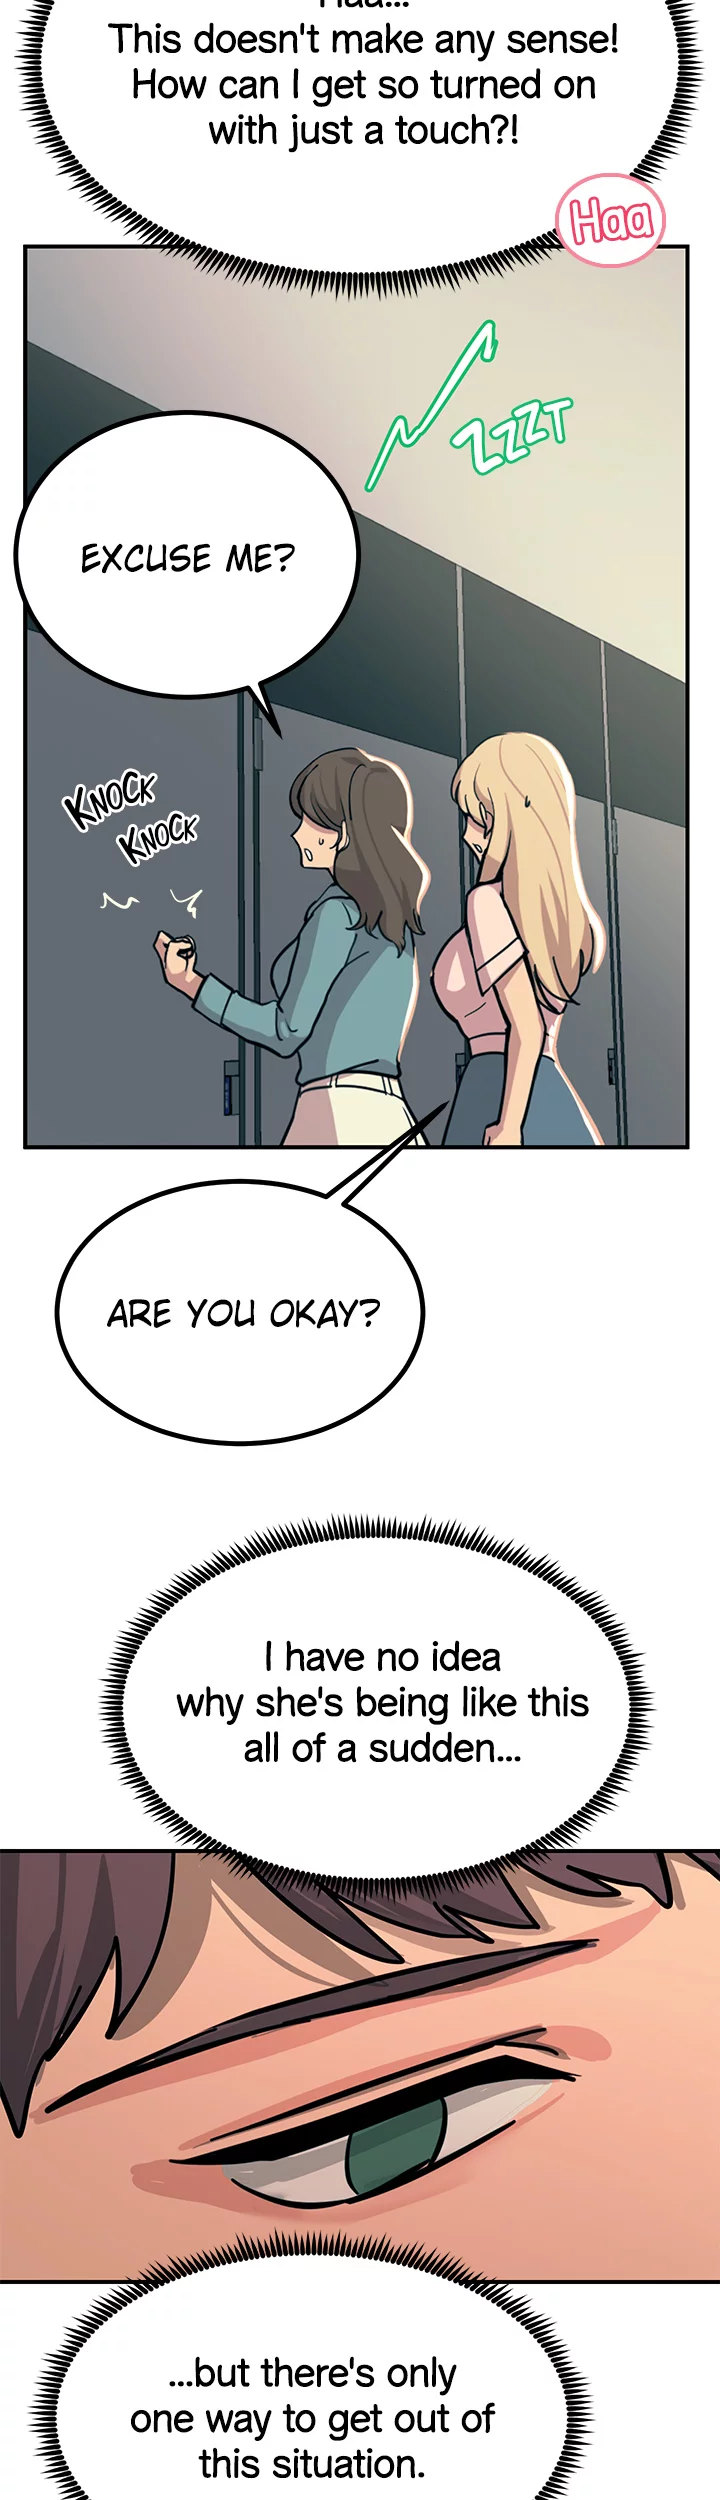 Show Me Your Color - Chapter 22 Page 17